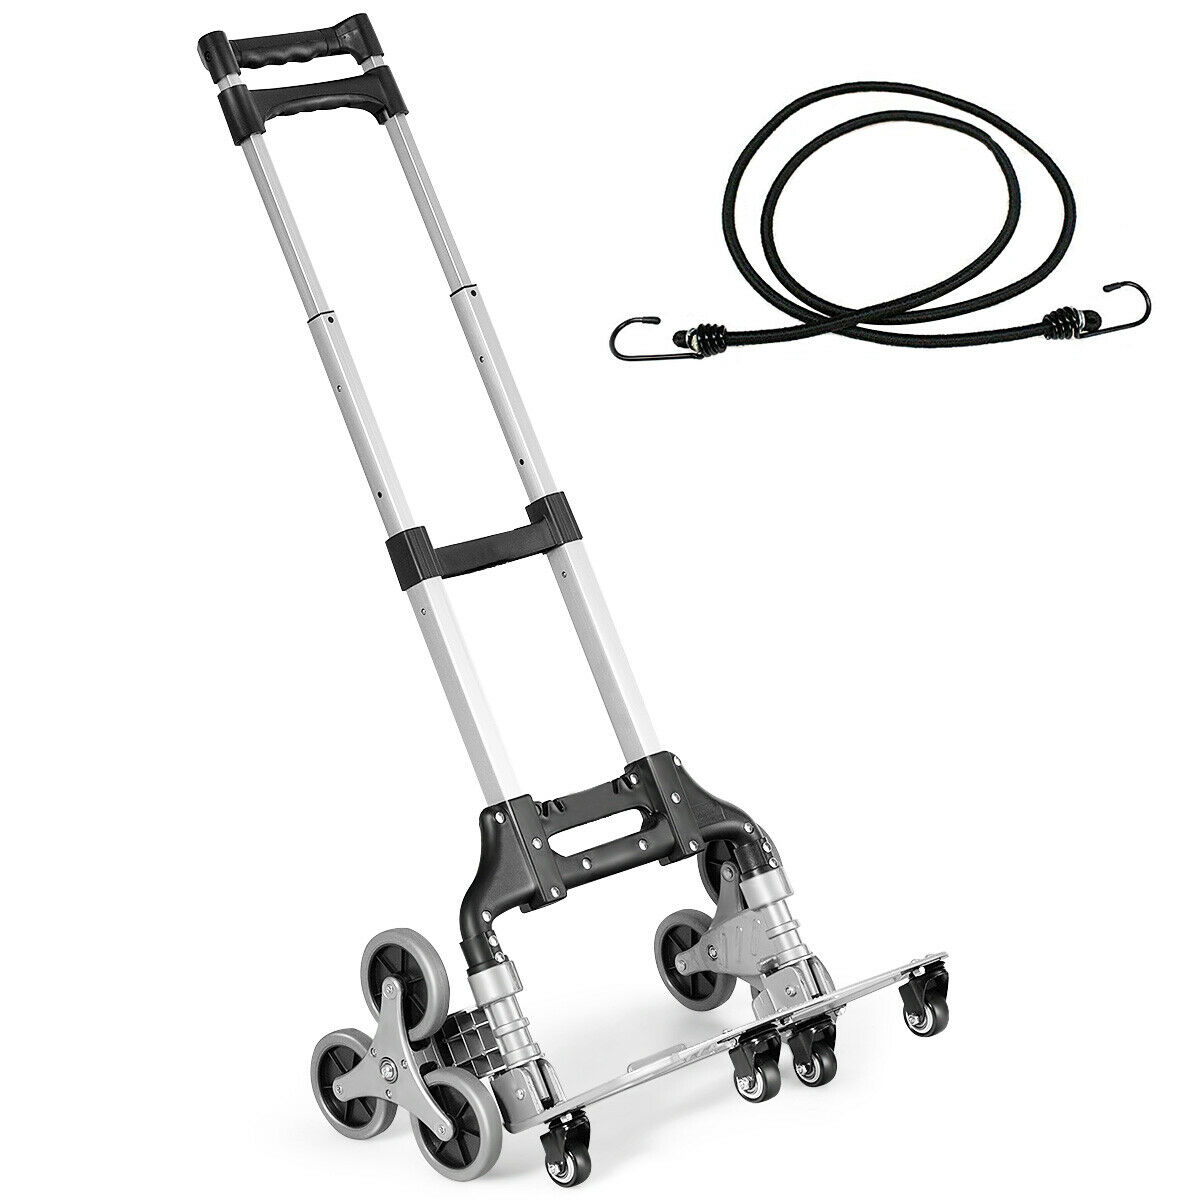 Folding Stair Climbing Cart Portable Hand Truck Utility Dolly W/ Bungee Cord